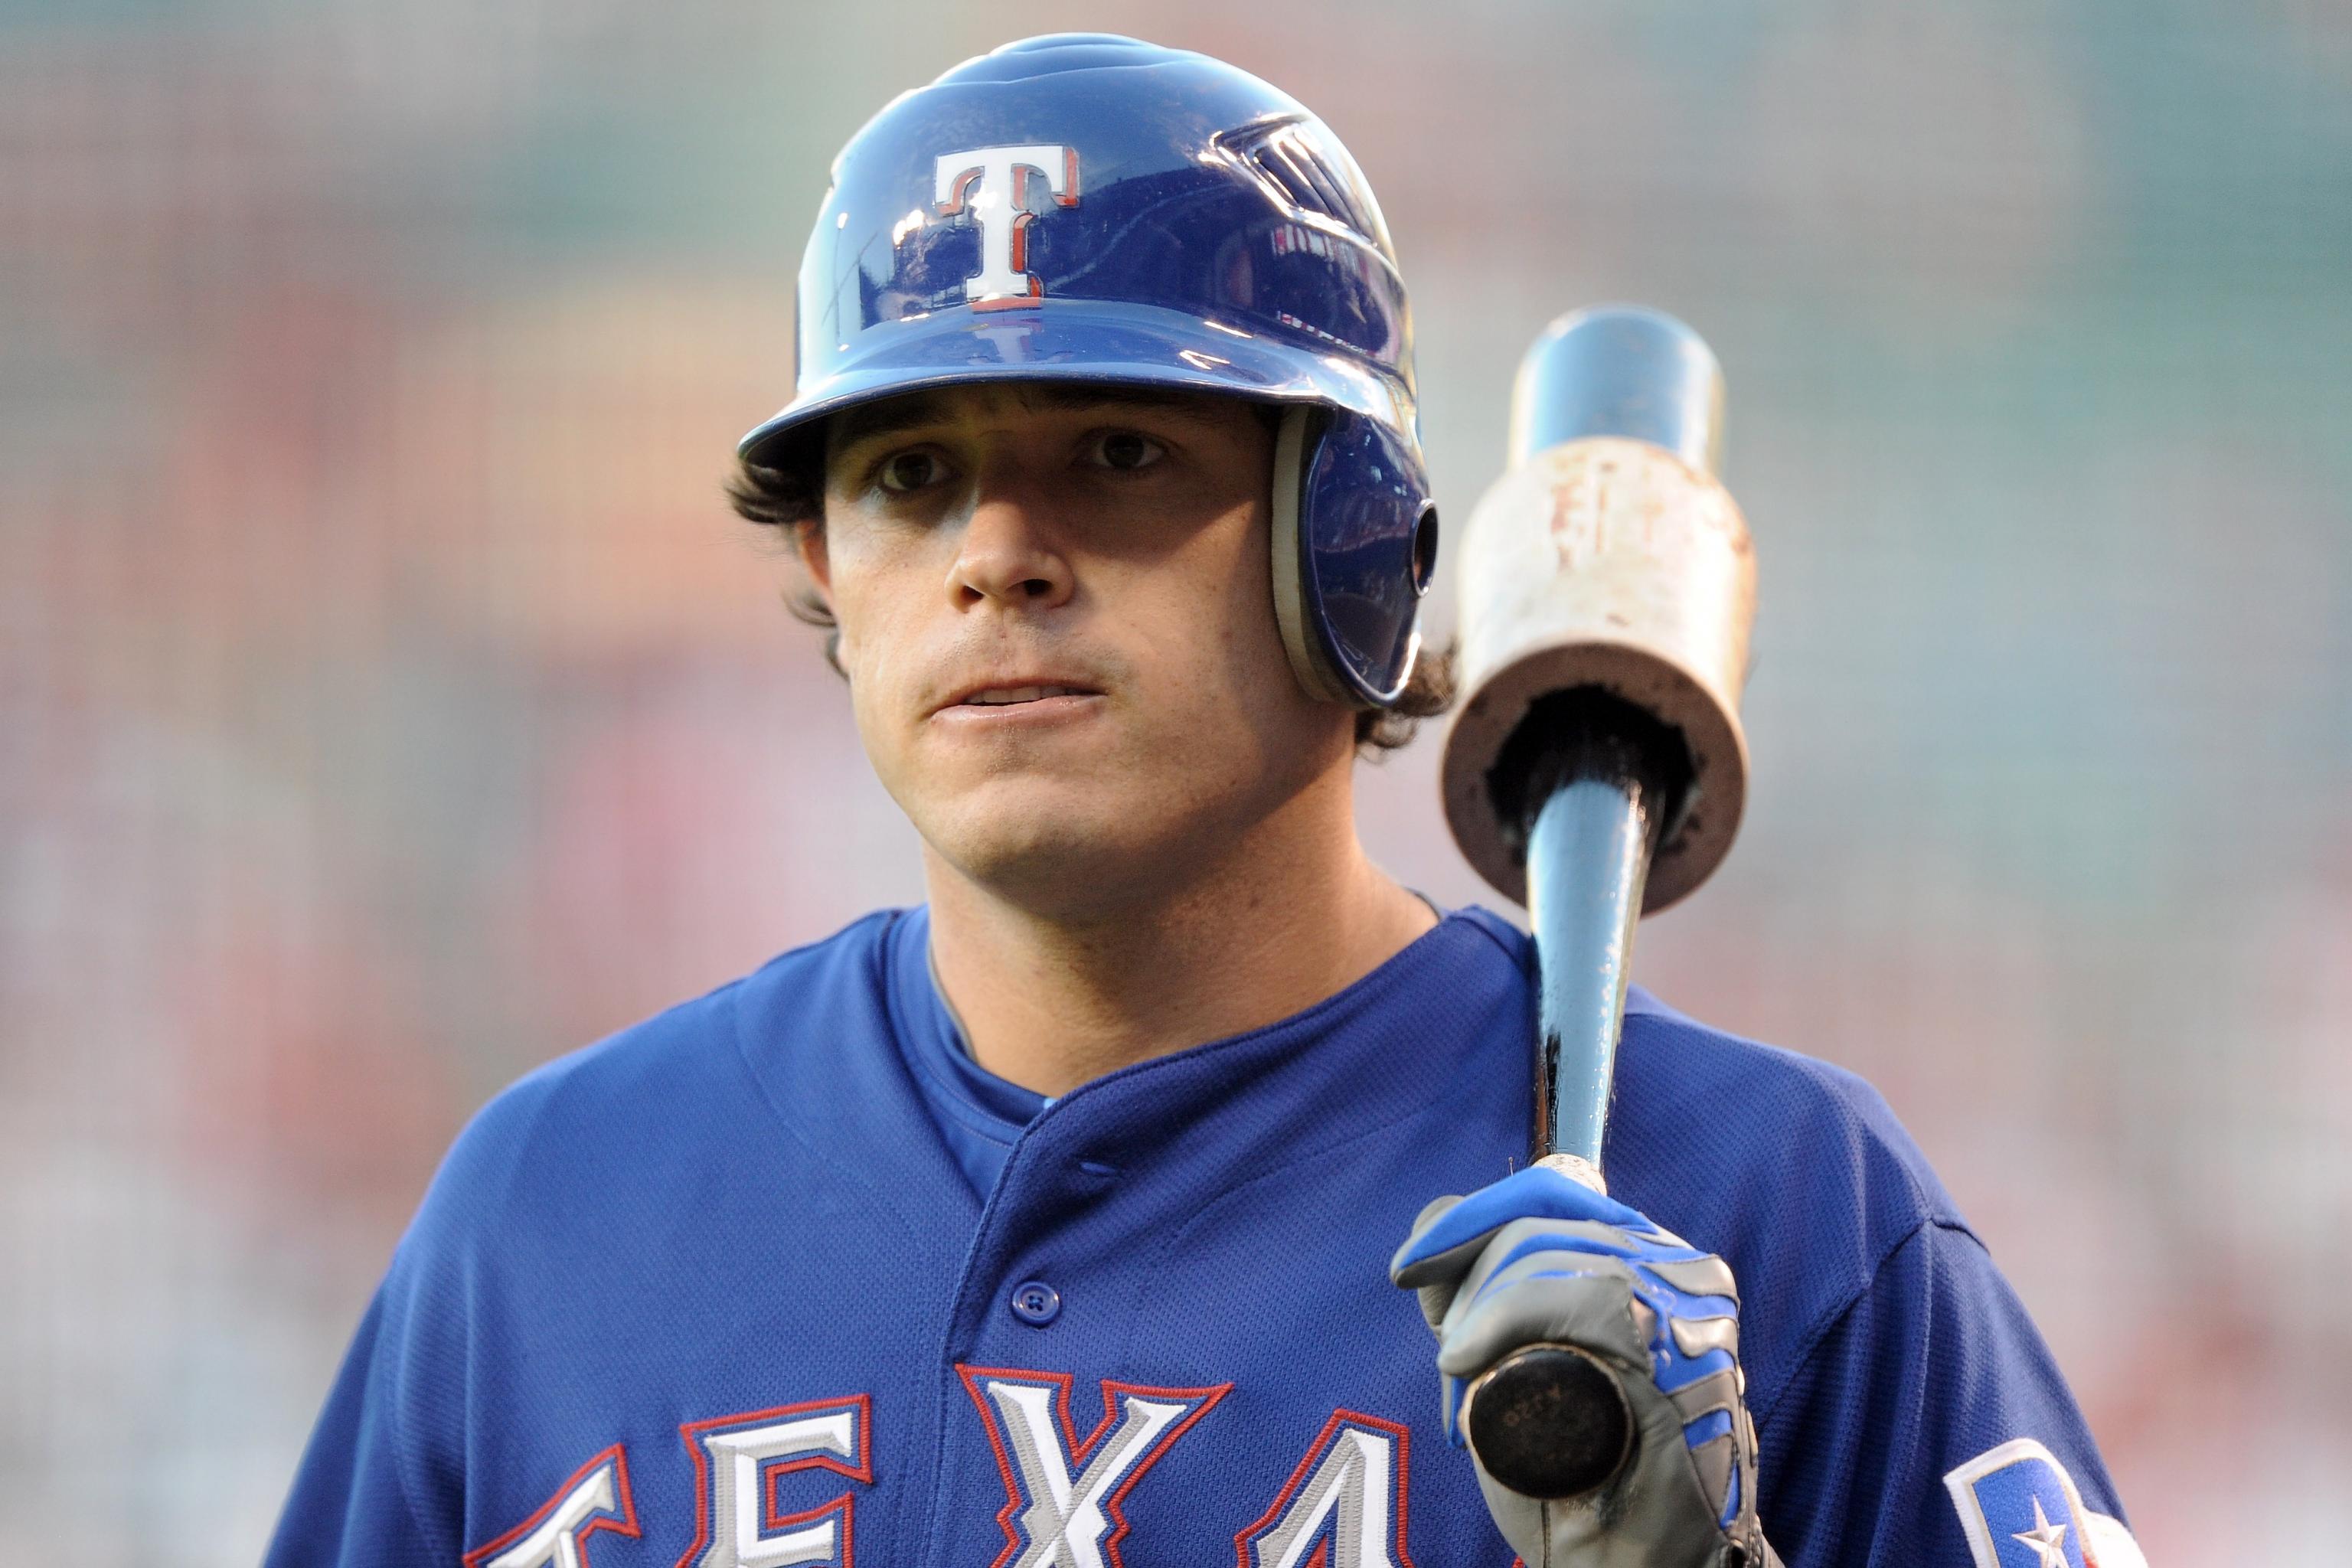 Ian Kinsler Was Remarkably Underrated